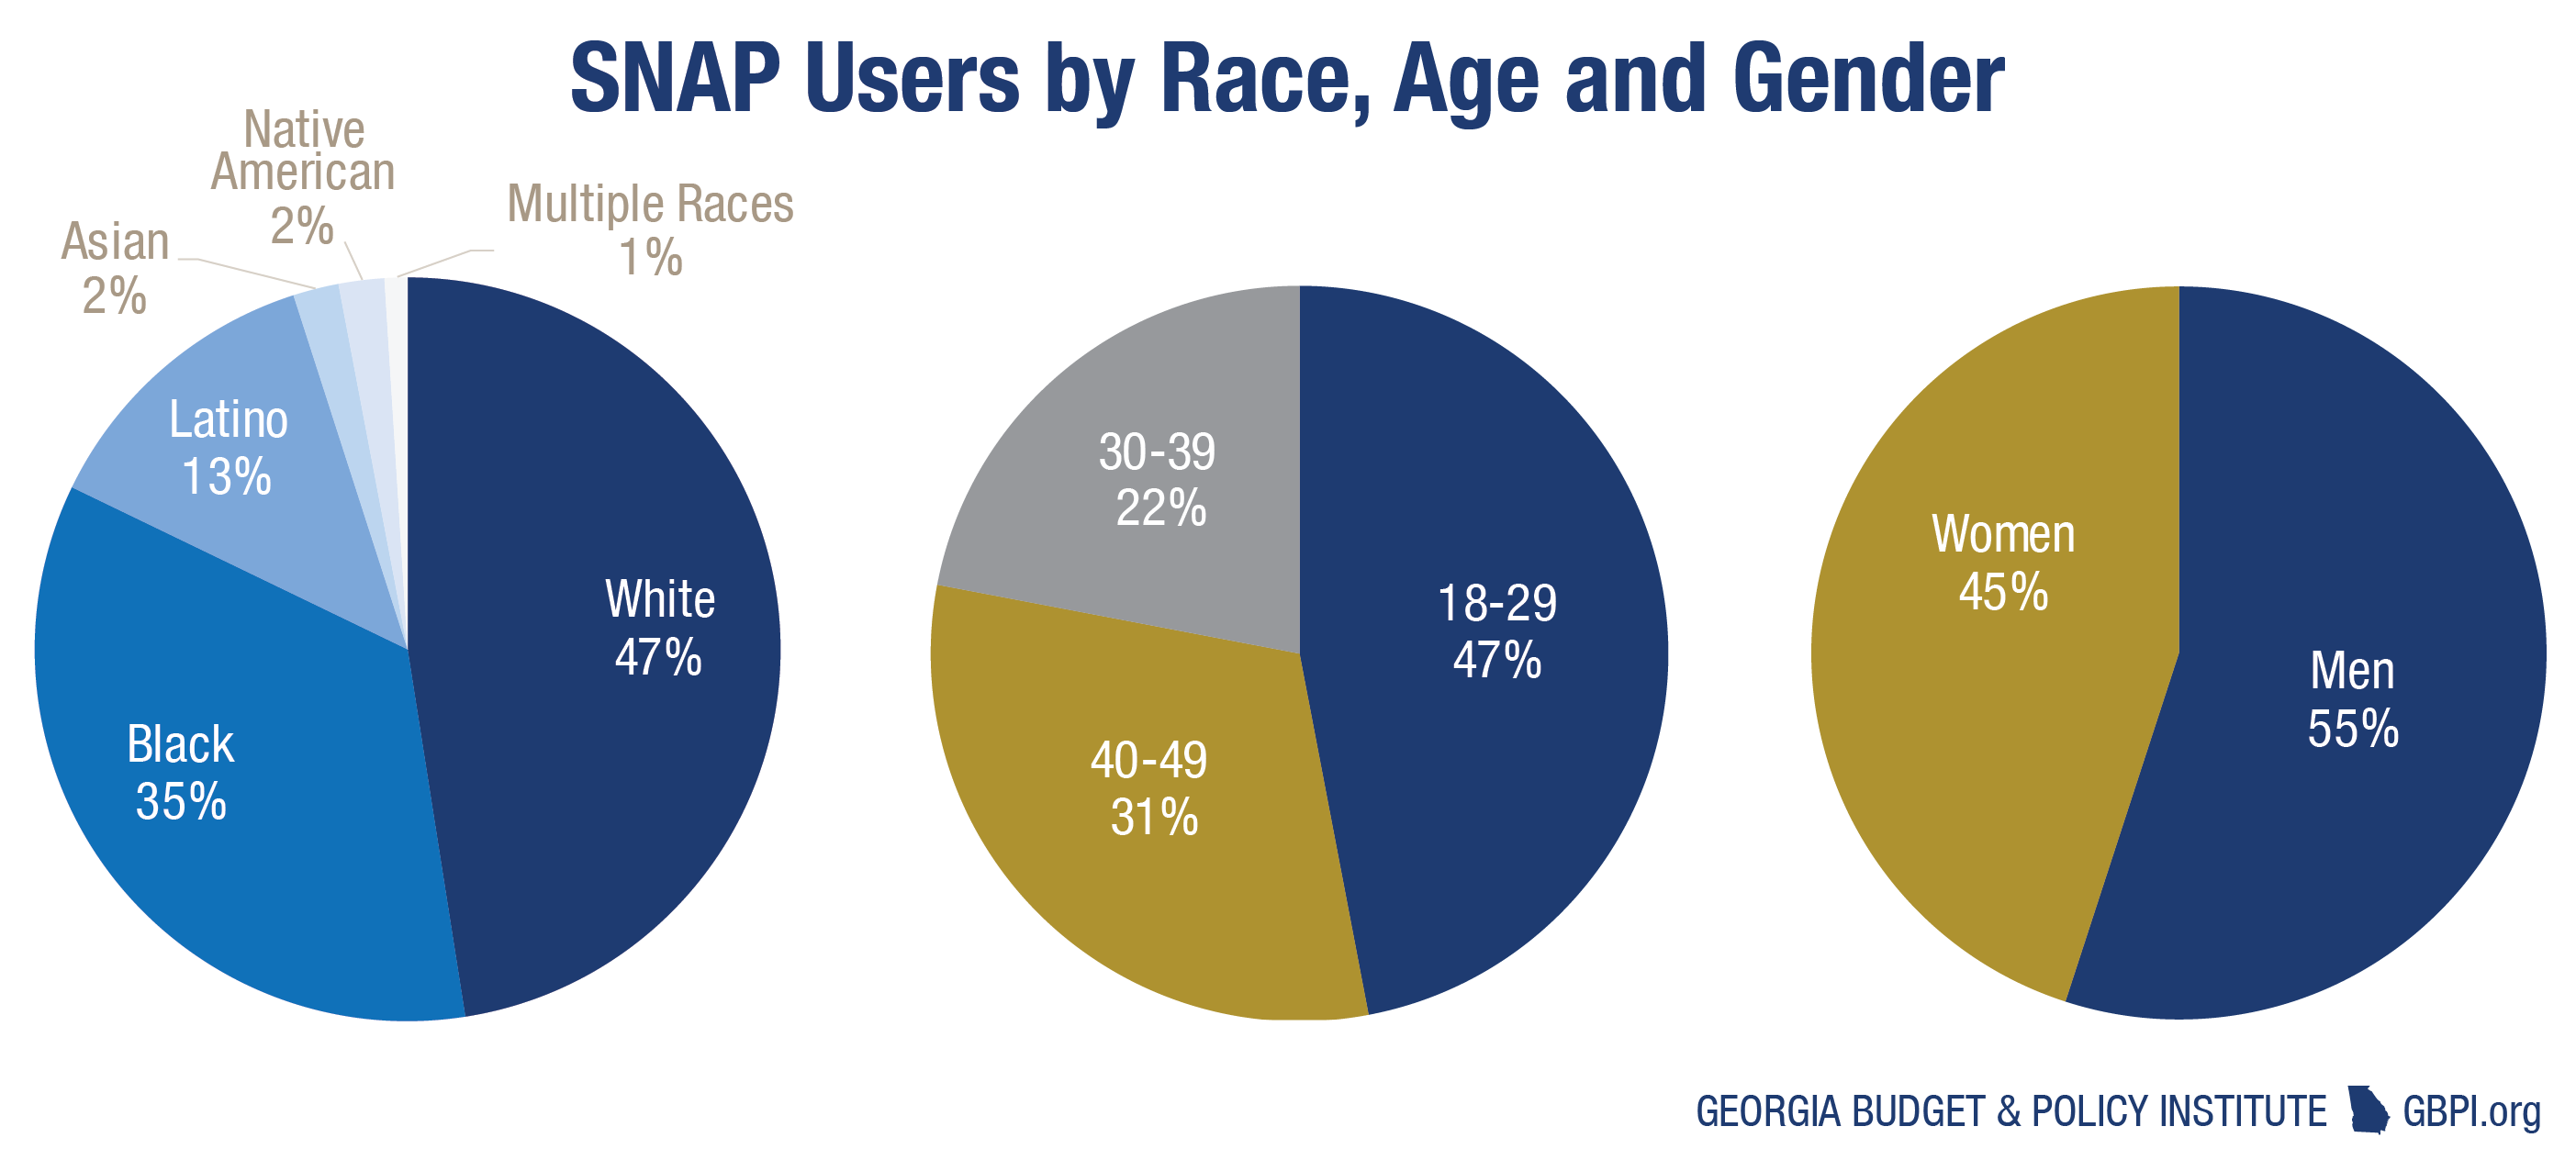 SNAP-Users-by-Race-Age-and-Gender-01.png